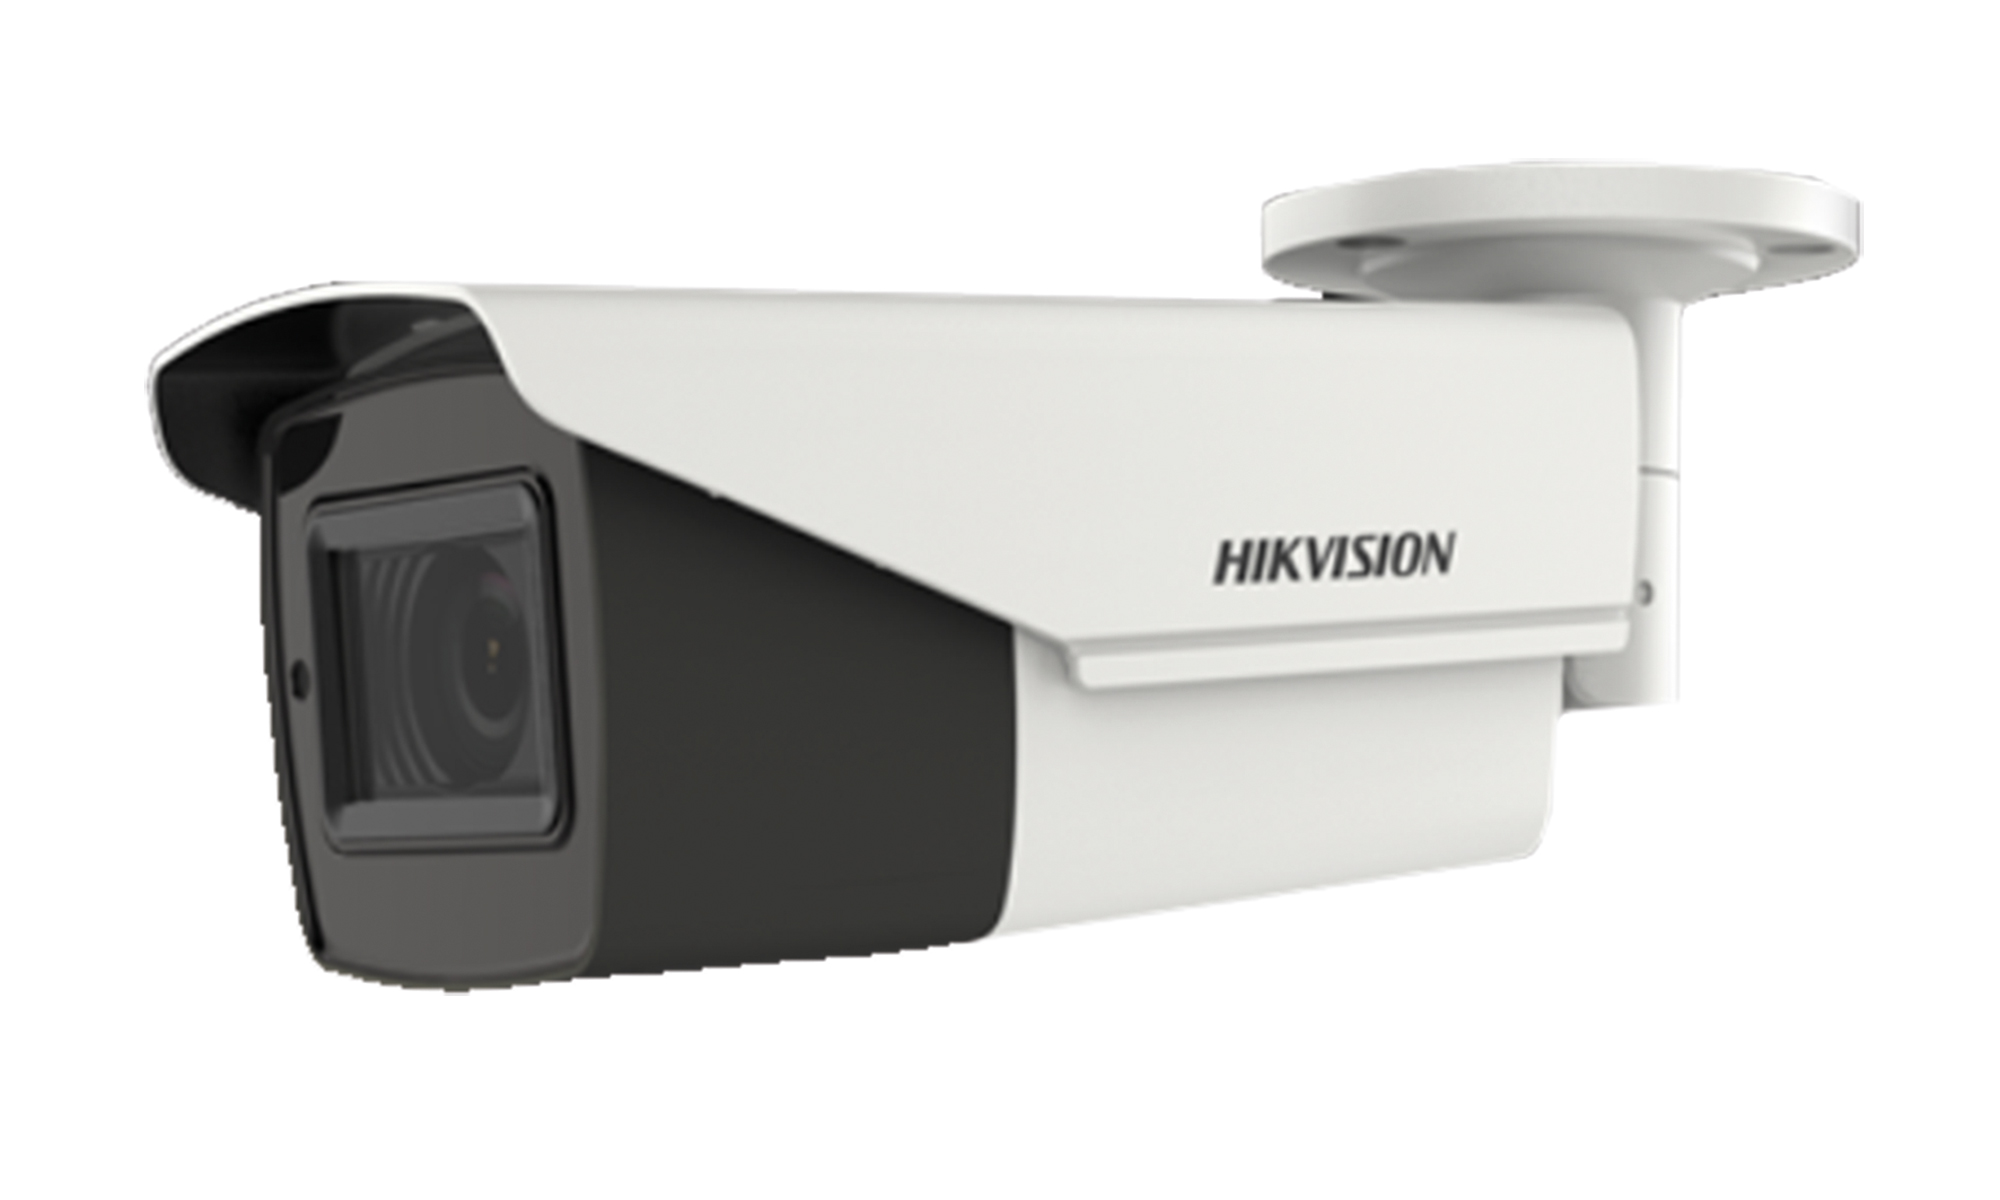 300203 Hikvision Turbo 4.0 8MP Ultra Low Light caméra bullet focale variable, 2.7-13.5mm